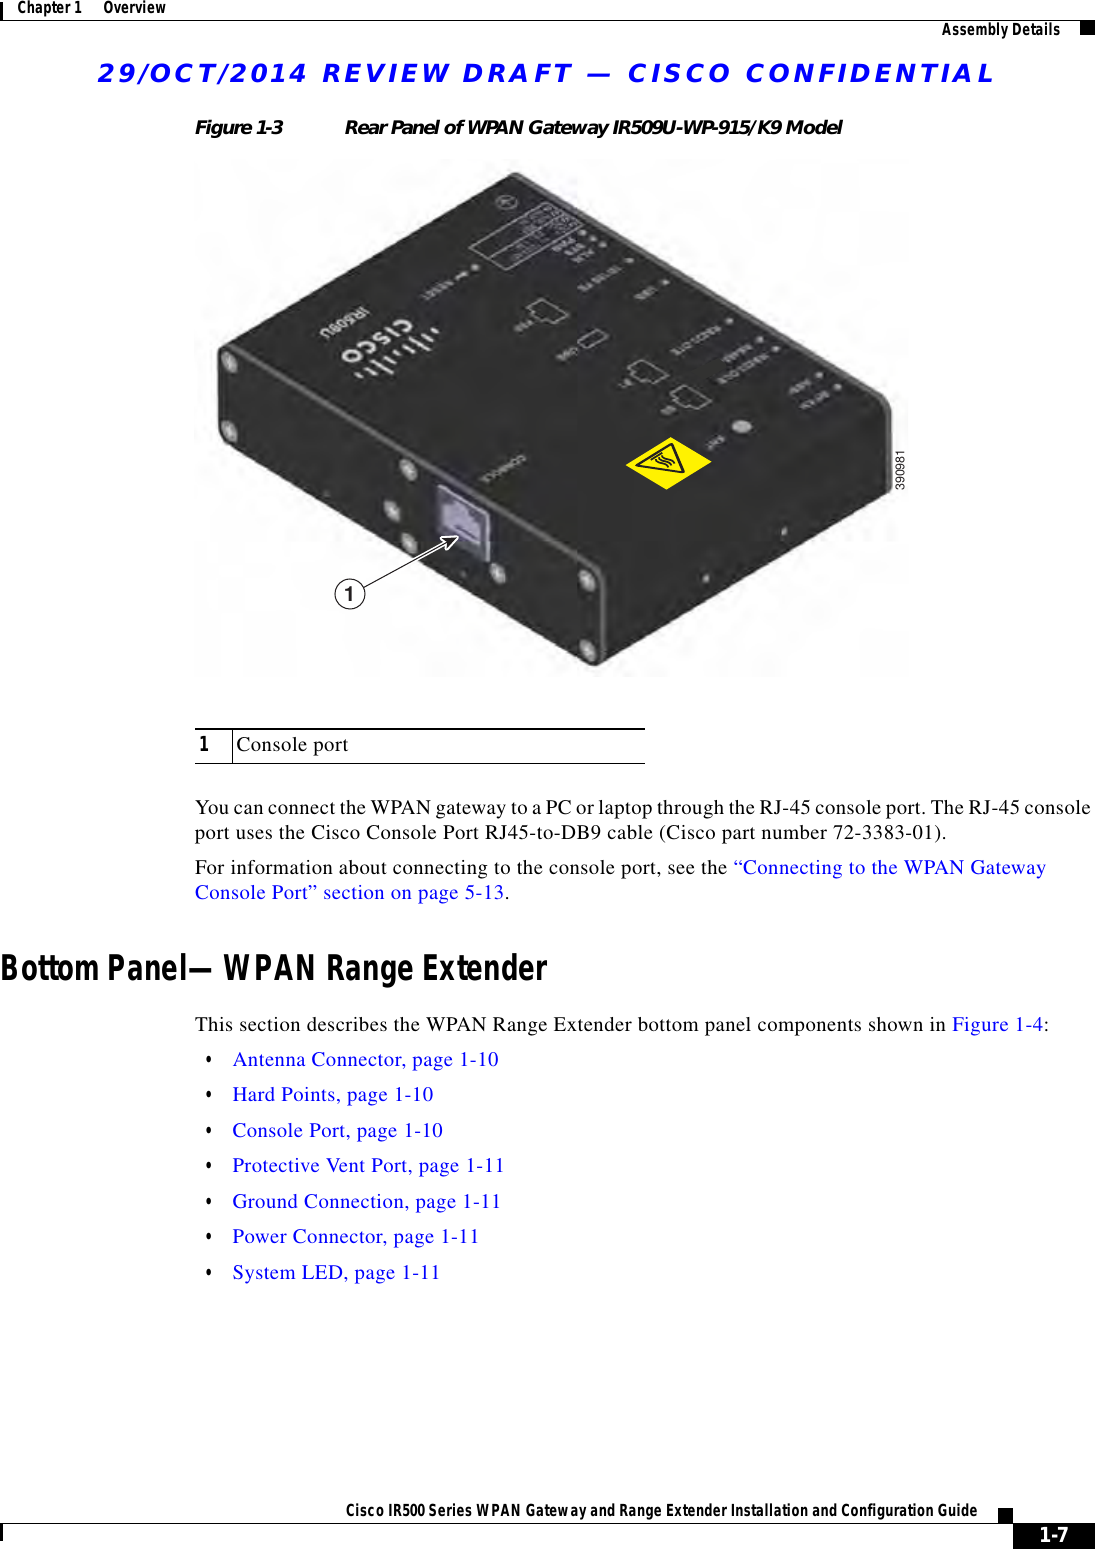 29/OCT/2014 REVIEW DRAFT — CISCO CONFIDENTIAL1-7Cisco IR500 Series WPAN Gateway and Range Extender Installation and Configuration Guide Chapter 1      Overview Assembly DetailsFigure 1-3 Rear Panel of WPAN Gateway IR509U-WP-915/K9 Model39098111Console portYou can connect the WPAN gateway to a PC or laptop through the RJ-45 console port. The RJ-45 console port uses the Cisco Console Port RJ45-to-DB9 cable (Cisco part number 72-3383-01).For information about connecting to the console port, see the “Connecting to the WPAN Gateway Console Port” section on page 5-13.Bottom Panel—WPAN Range ExtenderThis section describes the WPAN Range Extender bottom panel components shown in Figure 1-4:  • Antenna Connector, page 1-10  • Hard Points, page 1-10  • Console Port, page 1-10  • Protective Vent Port, page 1-11  • Ground Connection, page 1-11  • Power Connector, page 1-11  • System LED, page 1-11